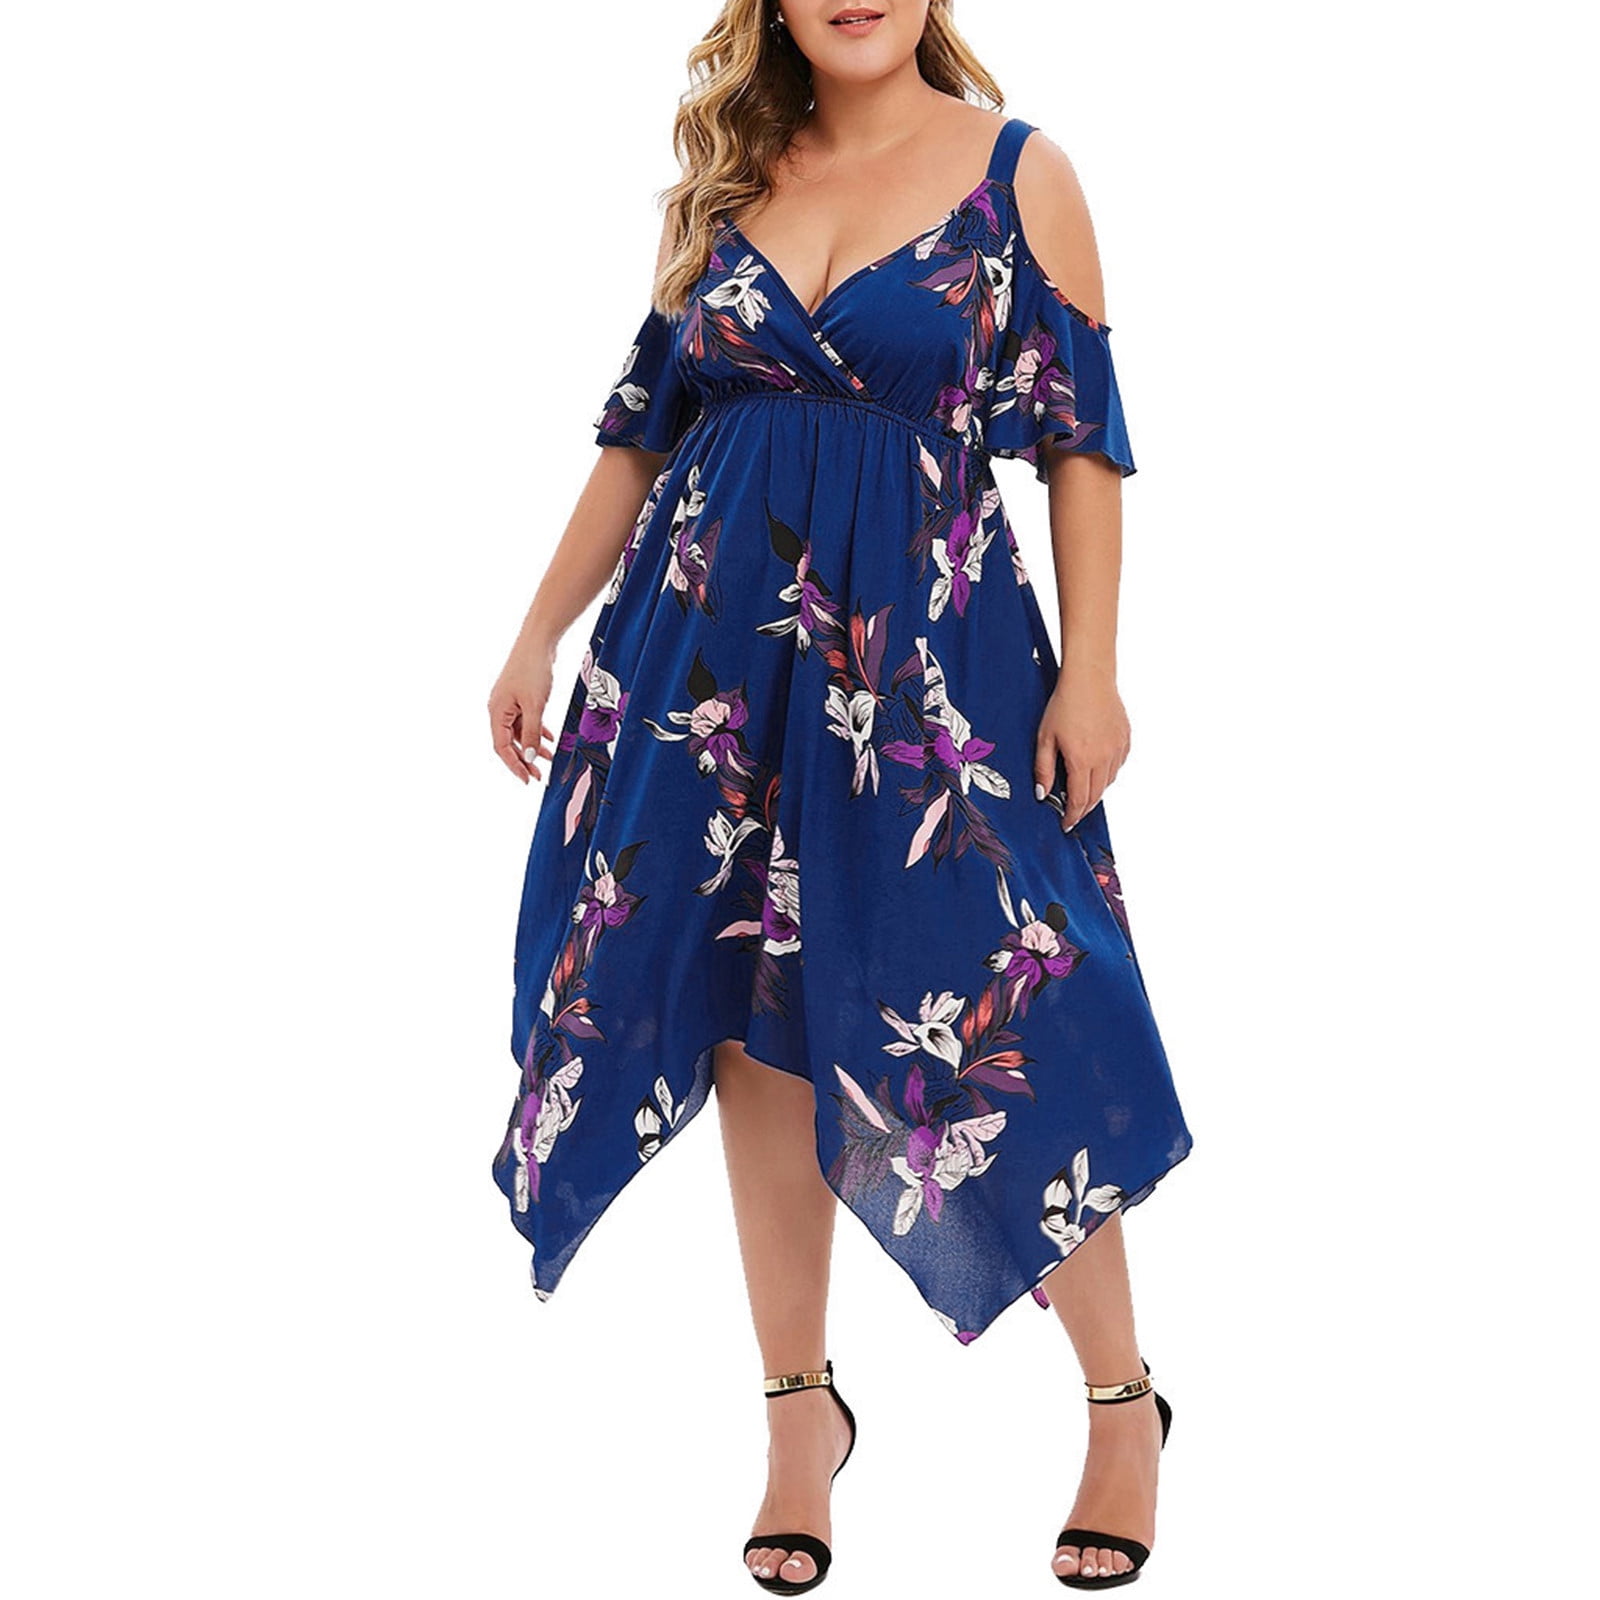 Lolmot Summer Dress for Women Plus Size Casual Floral Printed Cold ...